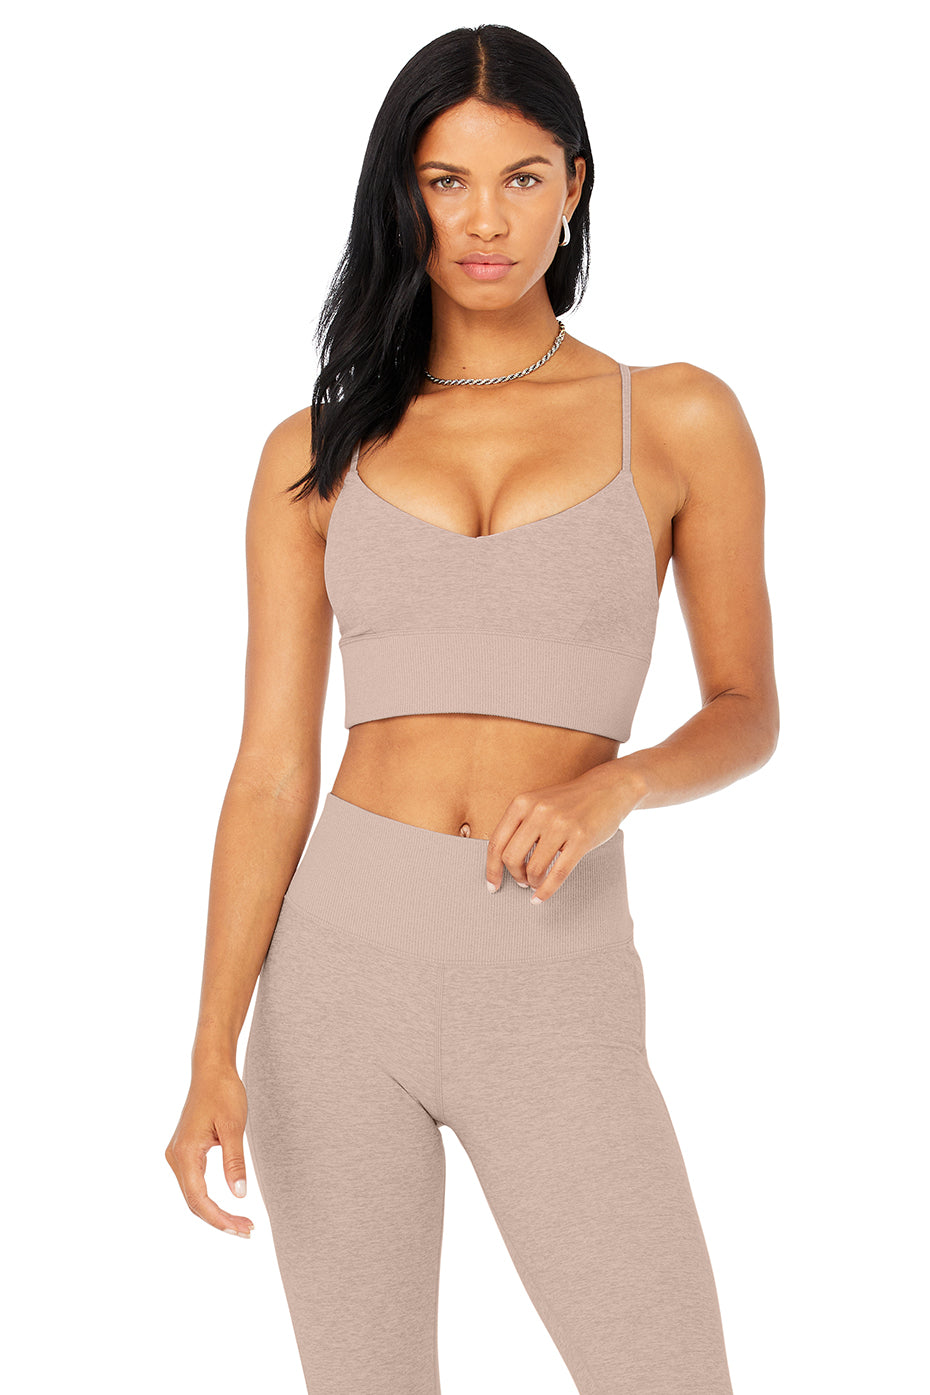 Alo Yoga Movement Sports Bra Crop Top Lace Up Dusty Rosewood Earth